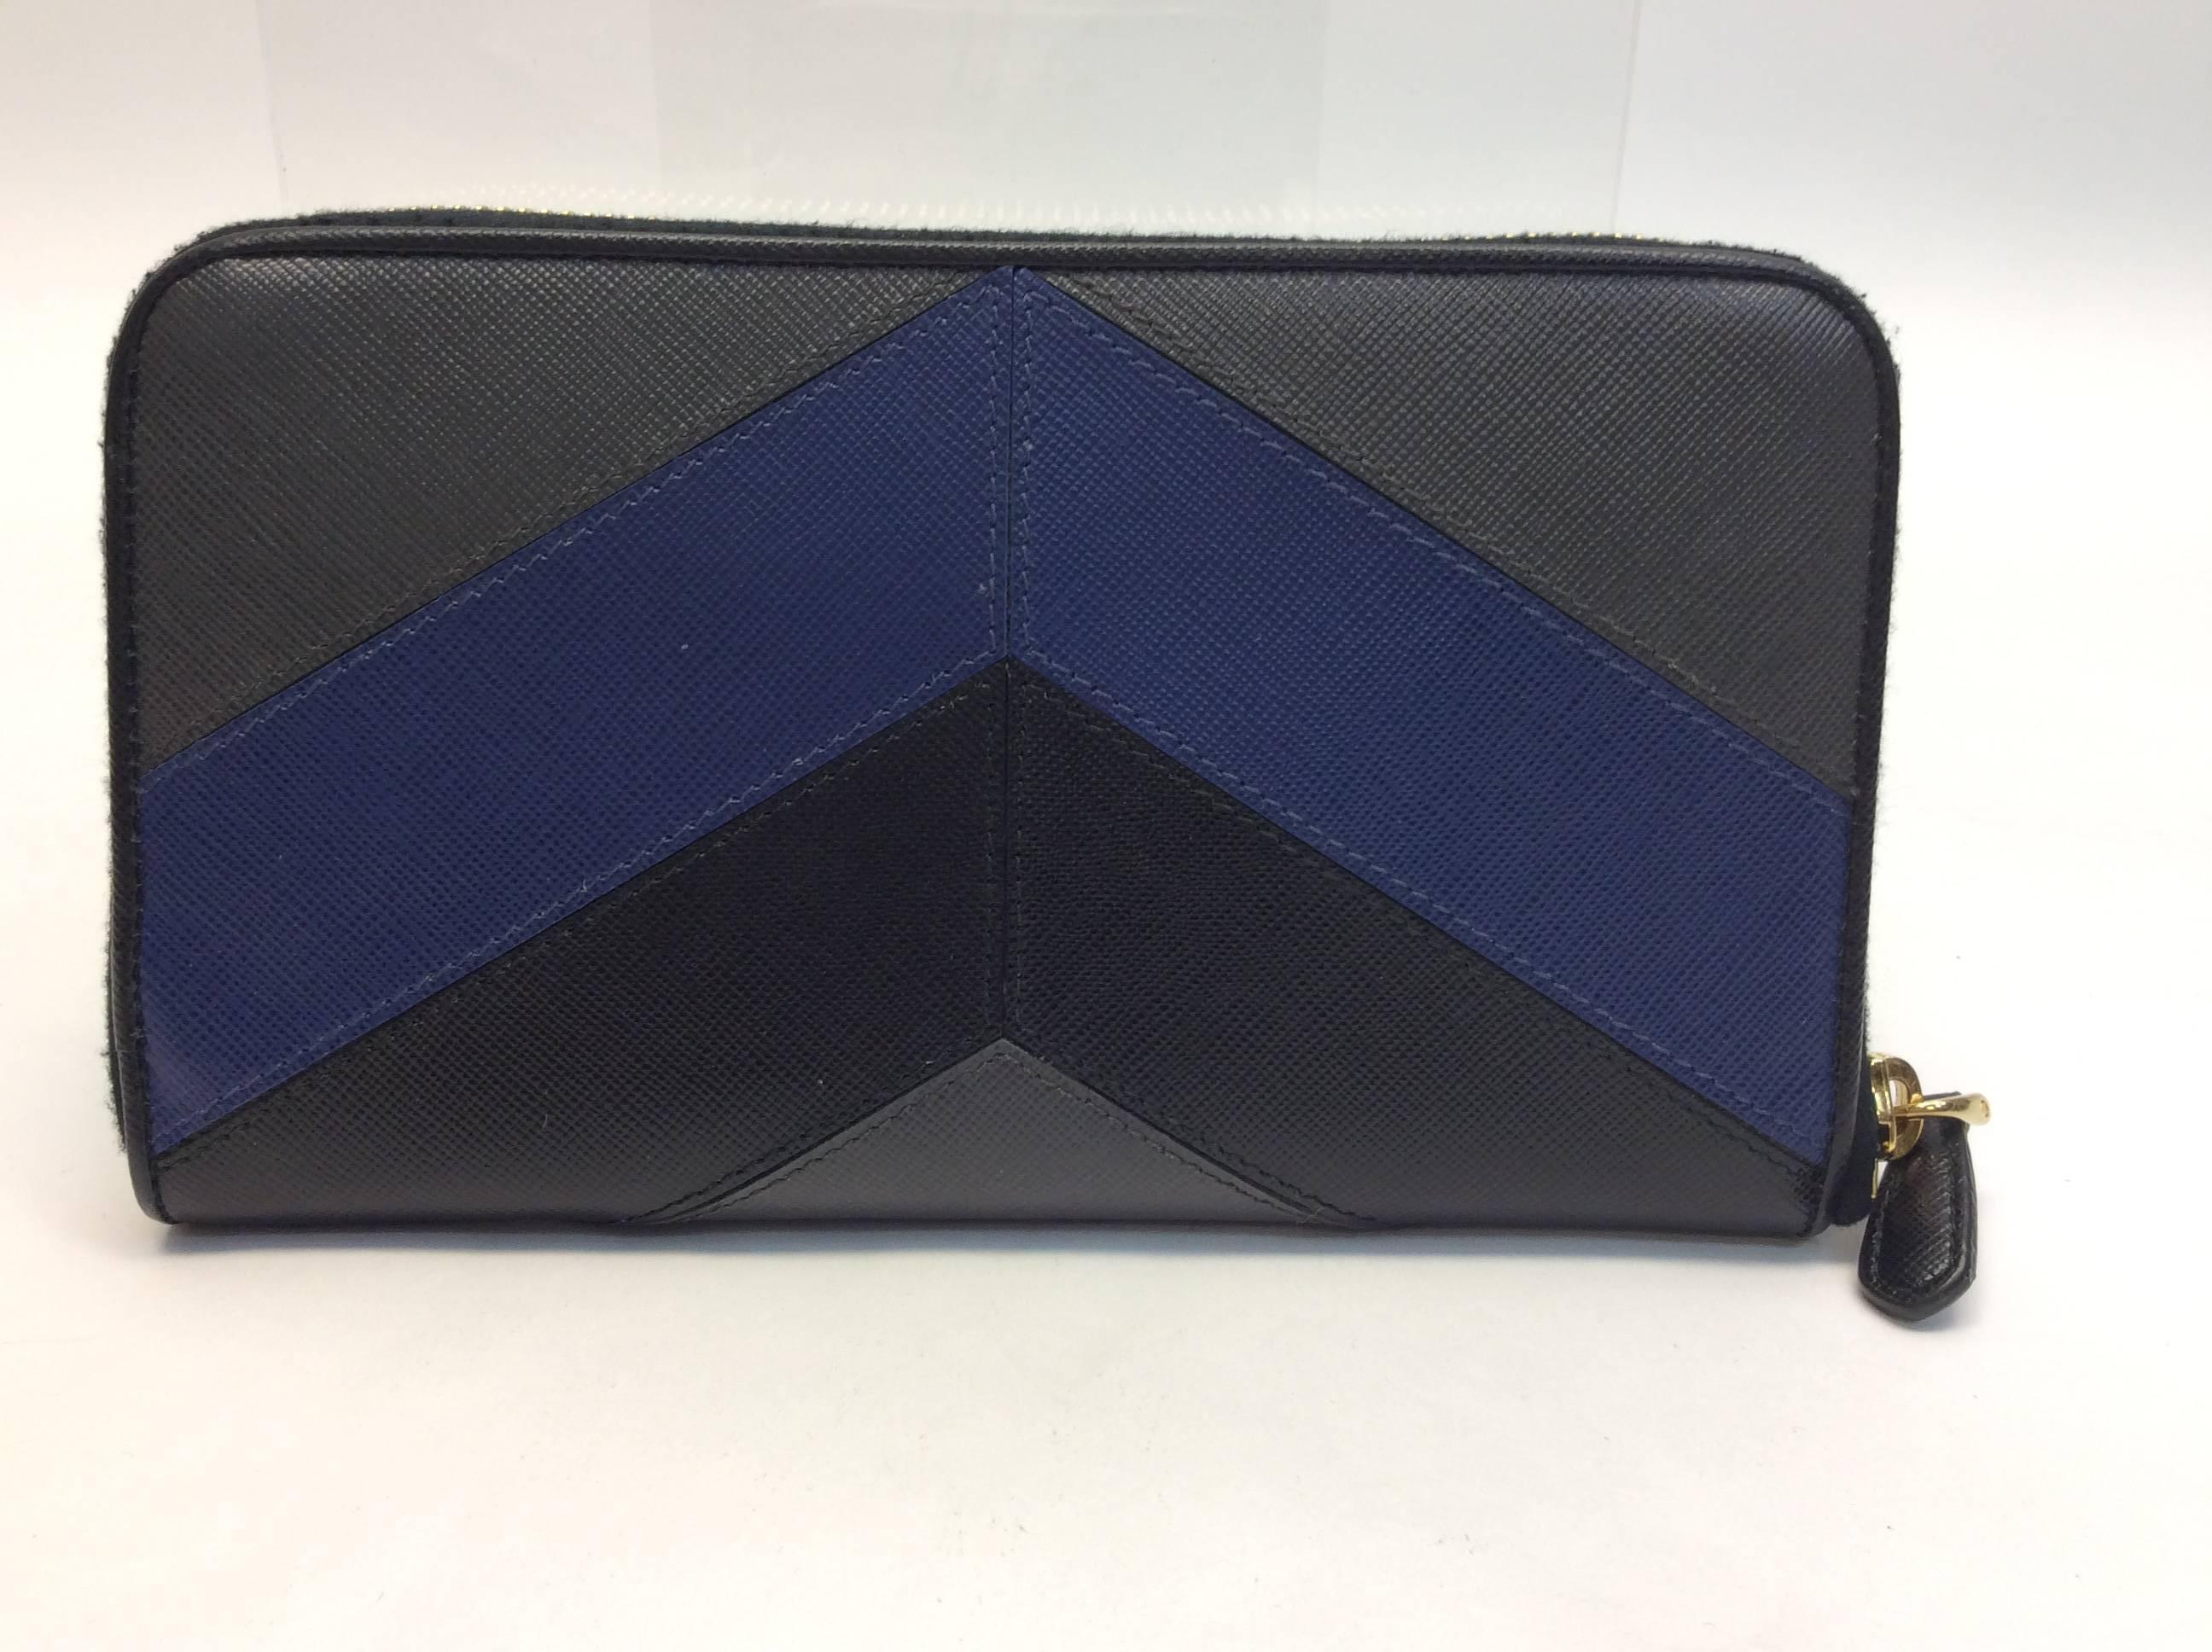 Prada Blue Grey and Black Wallet In Excellent Condition For Sale In Narberth, PA